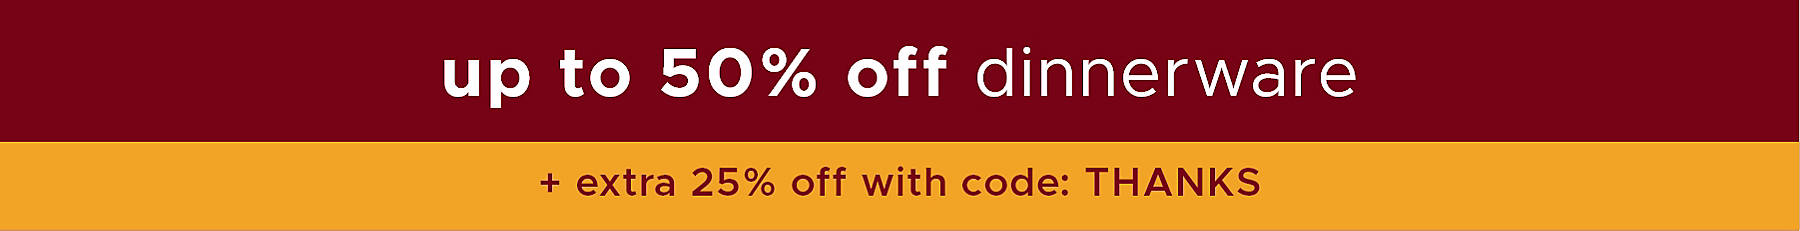 dinnerware up to 50% off + an extra 25% off with code: THANKS